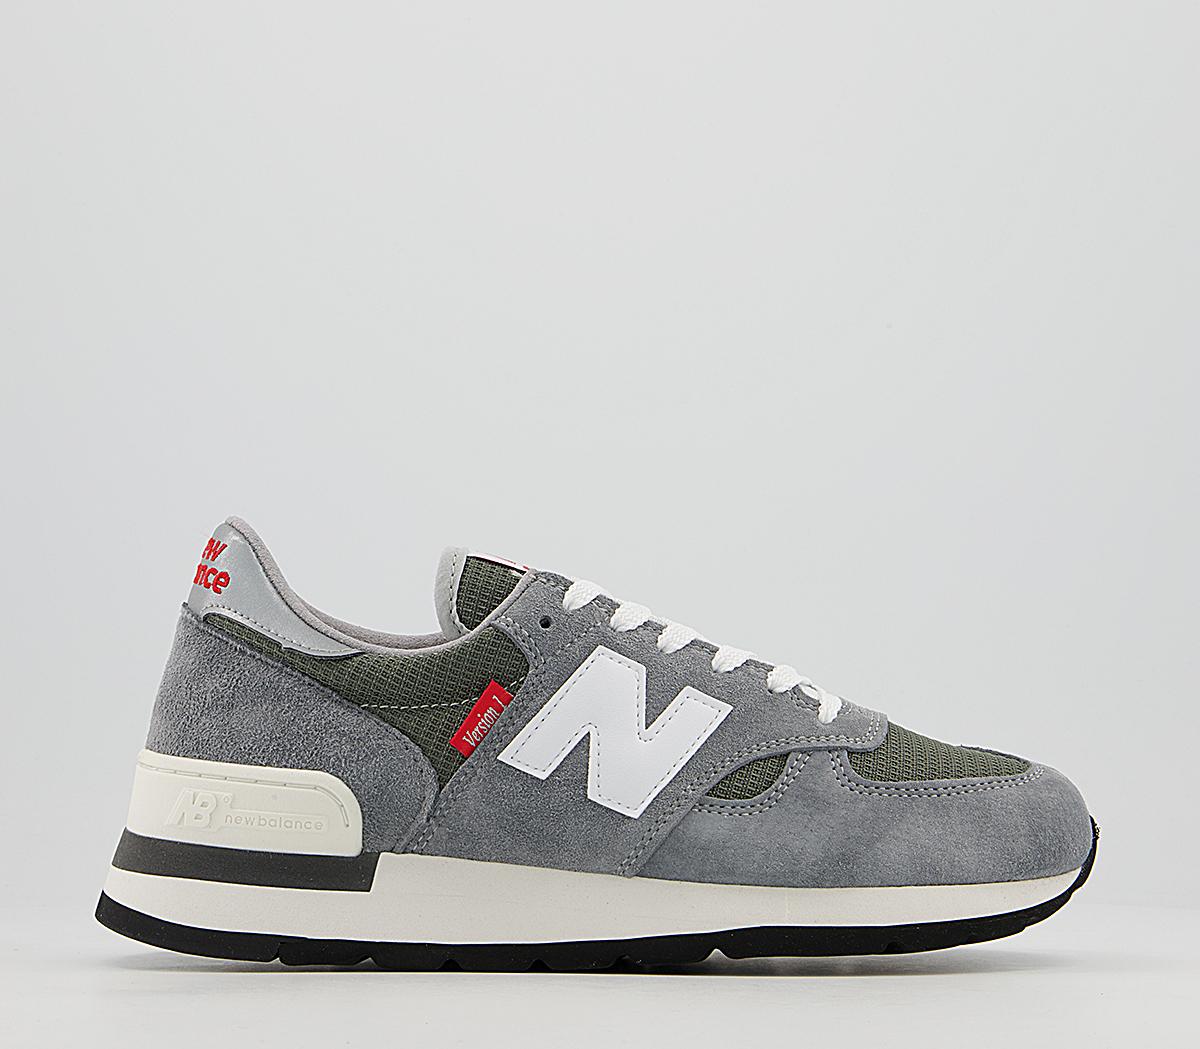 New Balance M990 Trainers V Series V1 Grey - His trainers